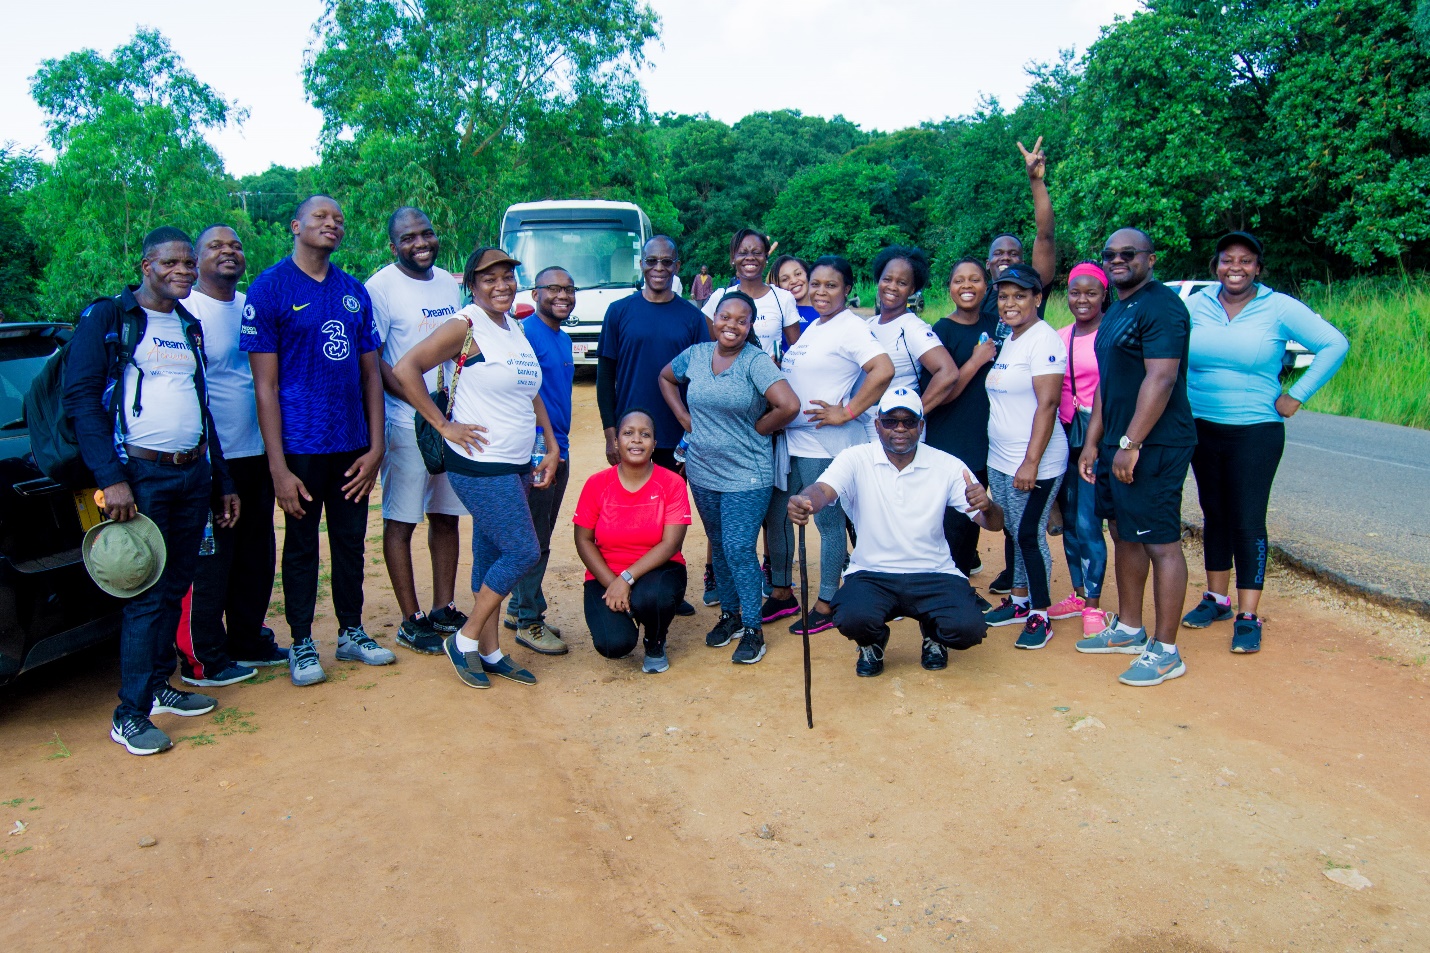  CDH Investment Bank employees who participated in the fun walk after the event on 2nd April 2022